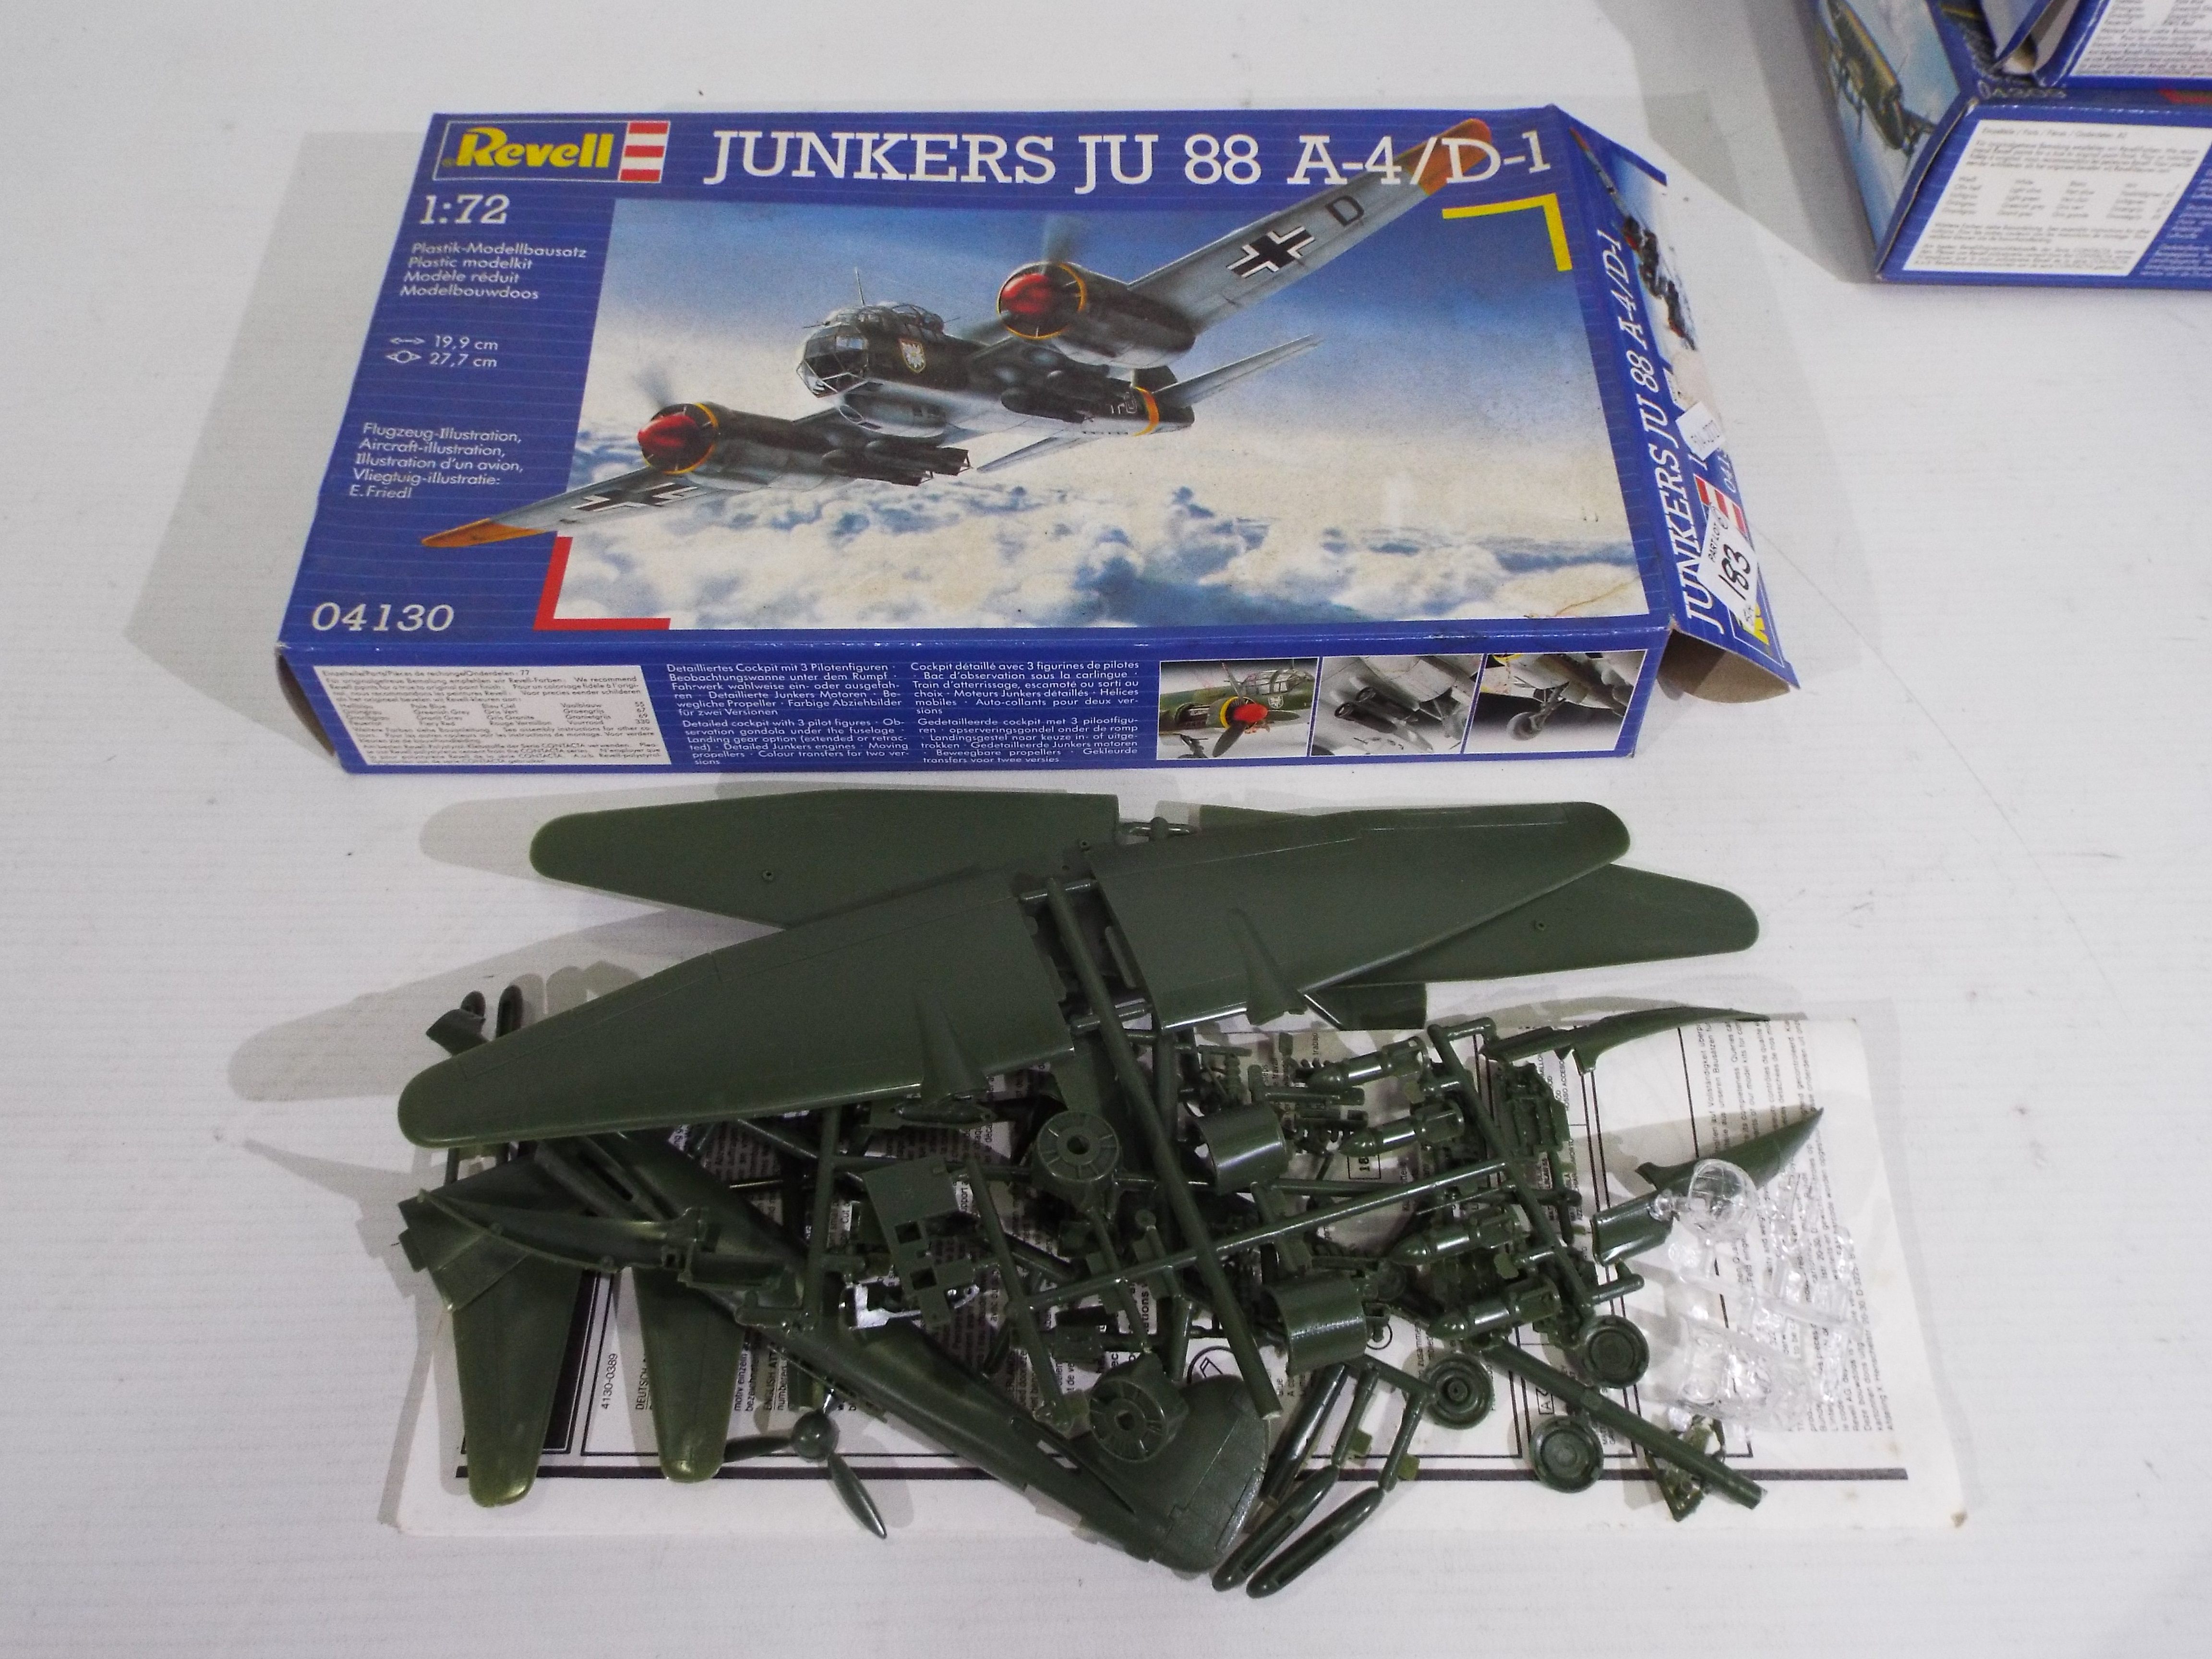 Revell - Six boxed Revell 1:72 scale German WW2 plastic military aircraft model kits. - Image 2 of 5